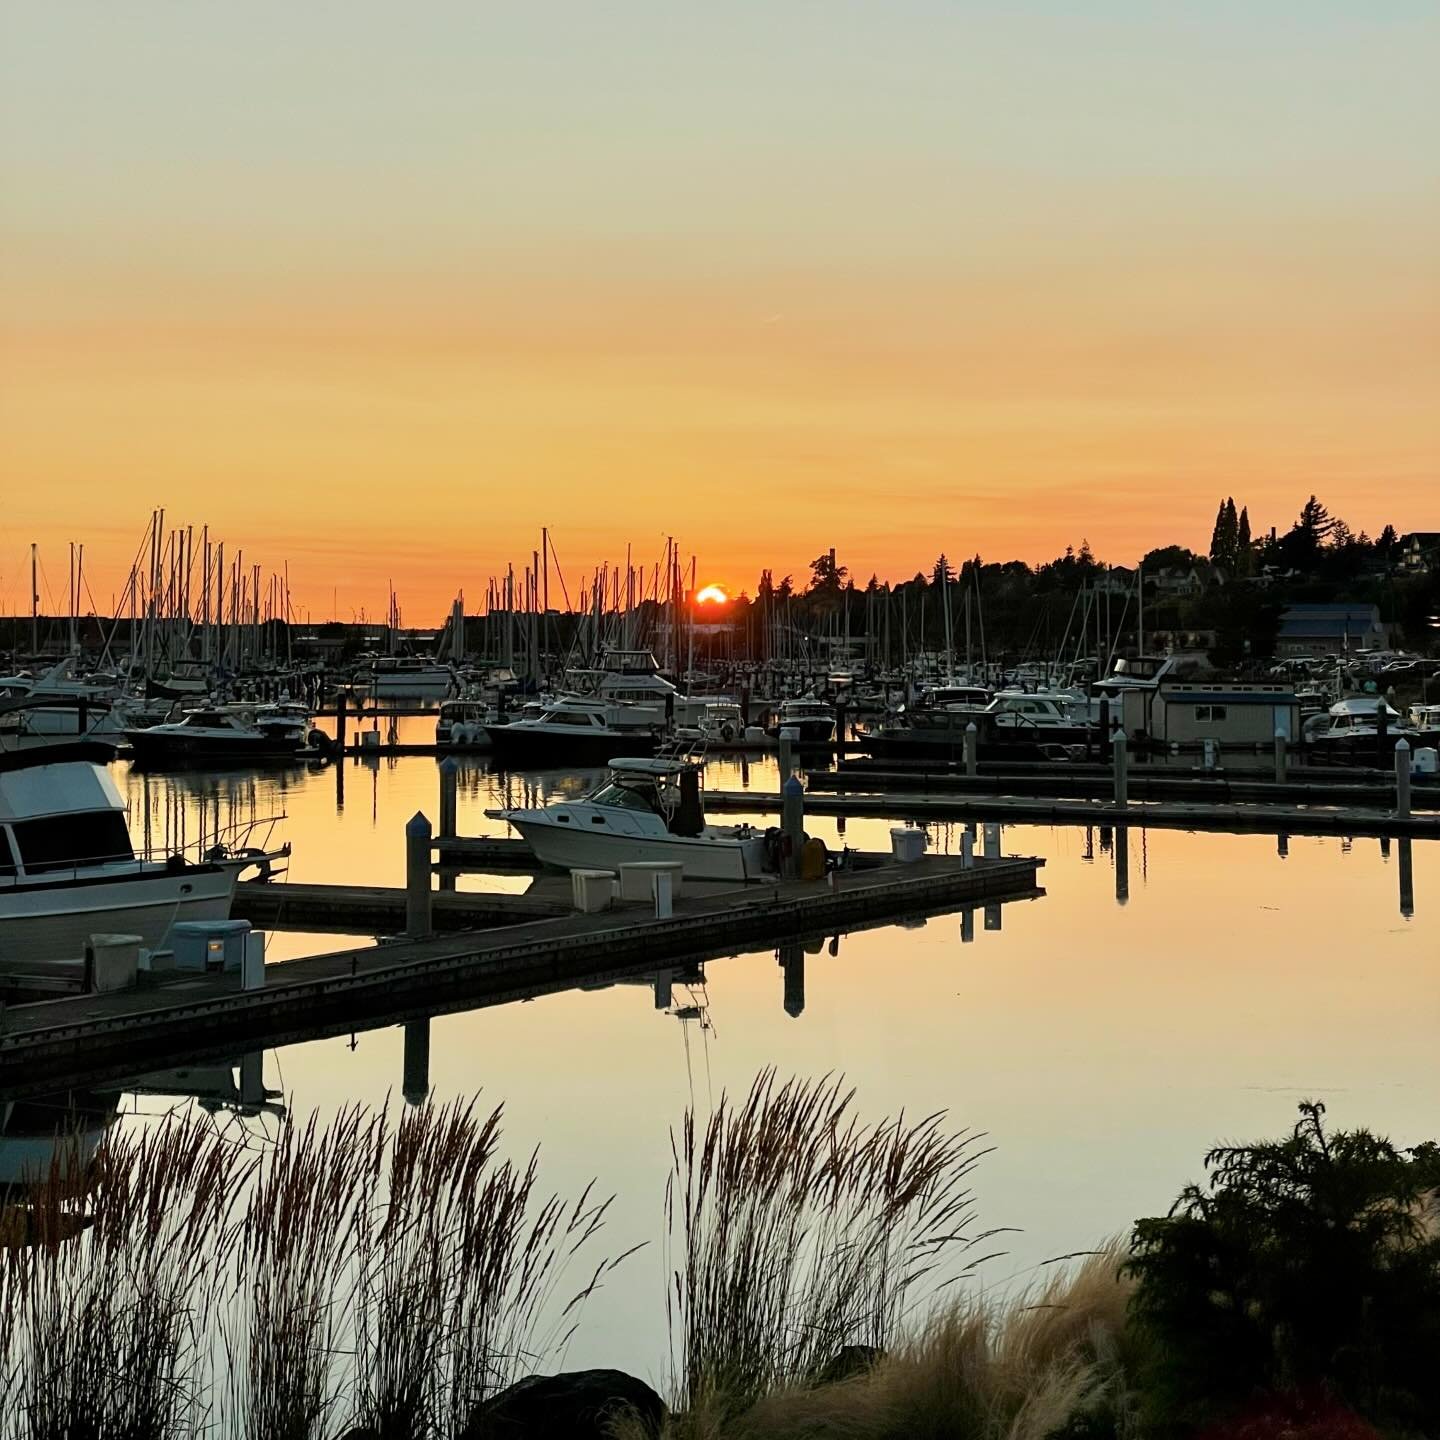 On this #throwbackthursday, I give you a Squalicum Harbor sunset taken from Anthony&rsquo;s Restaurant on July 23, 2021. 🌅⛵️